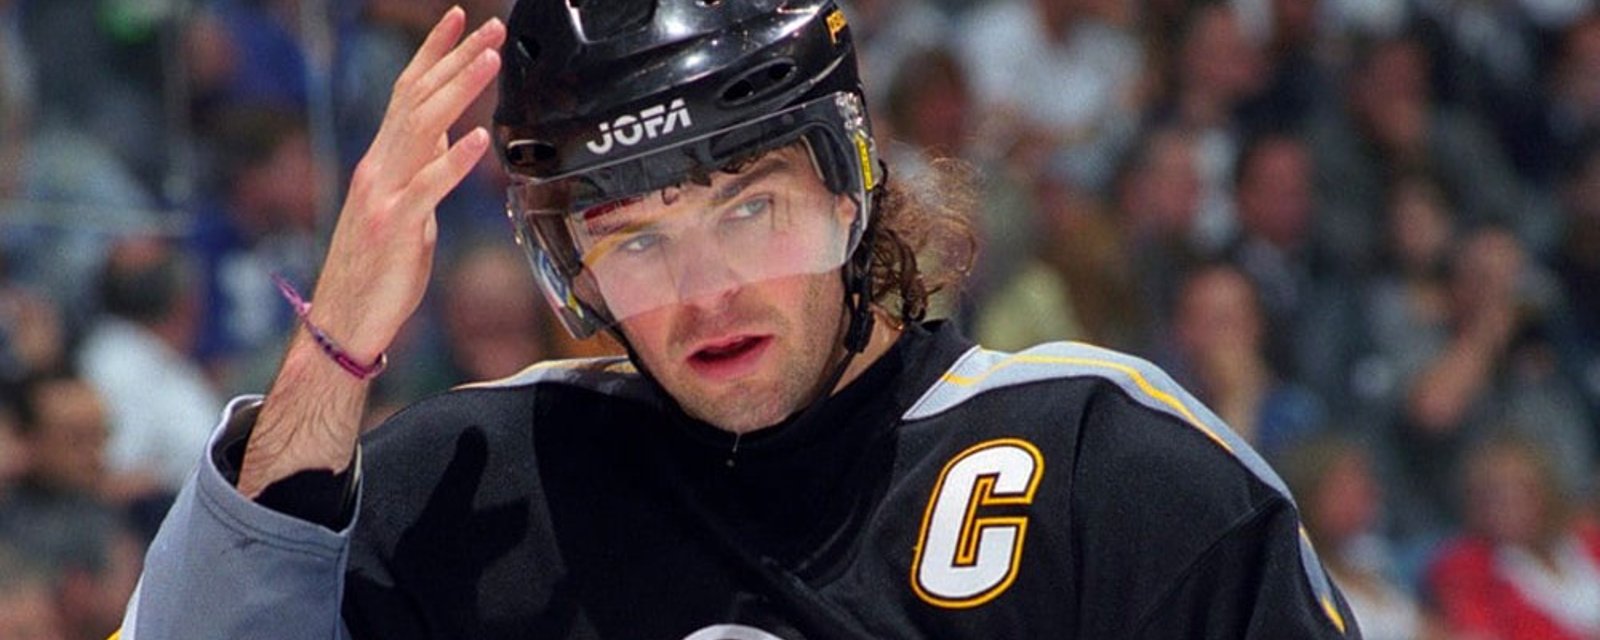 Rumors that Jagr is set to re-sign with the Penguins